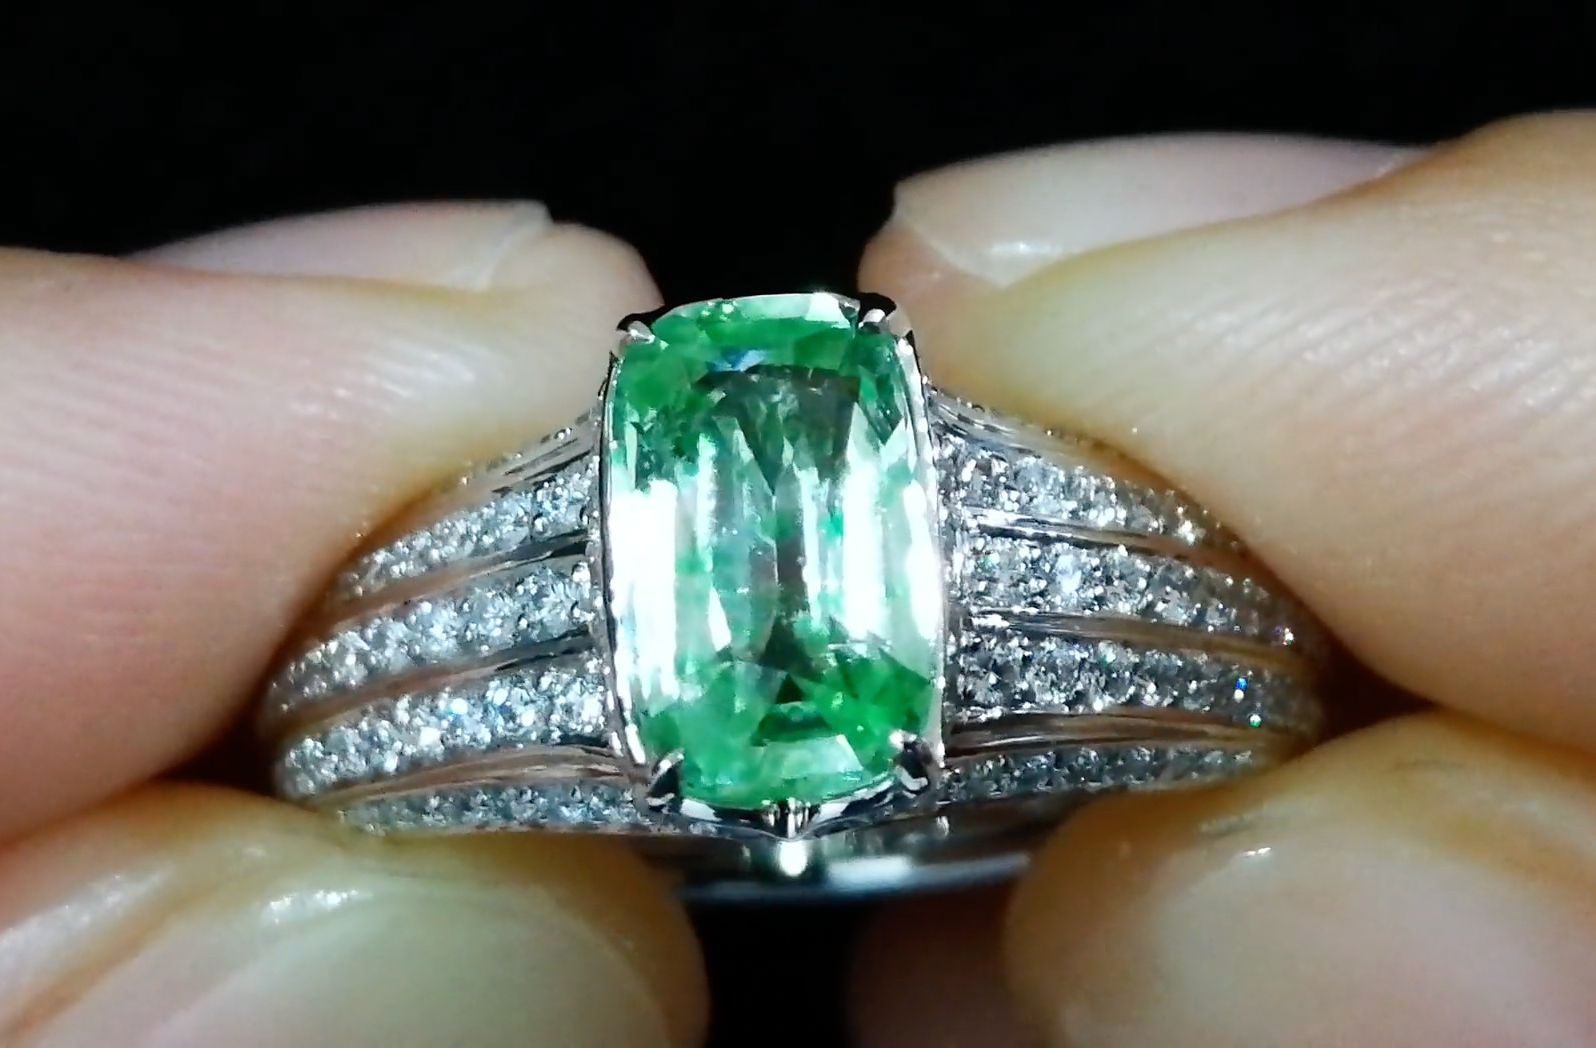 2.08ct Spotted Tsavorite Ring with D Flawless Diamonds set in 18K White Gold